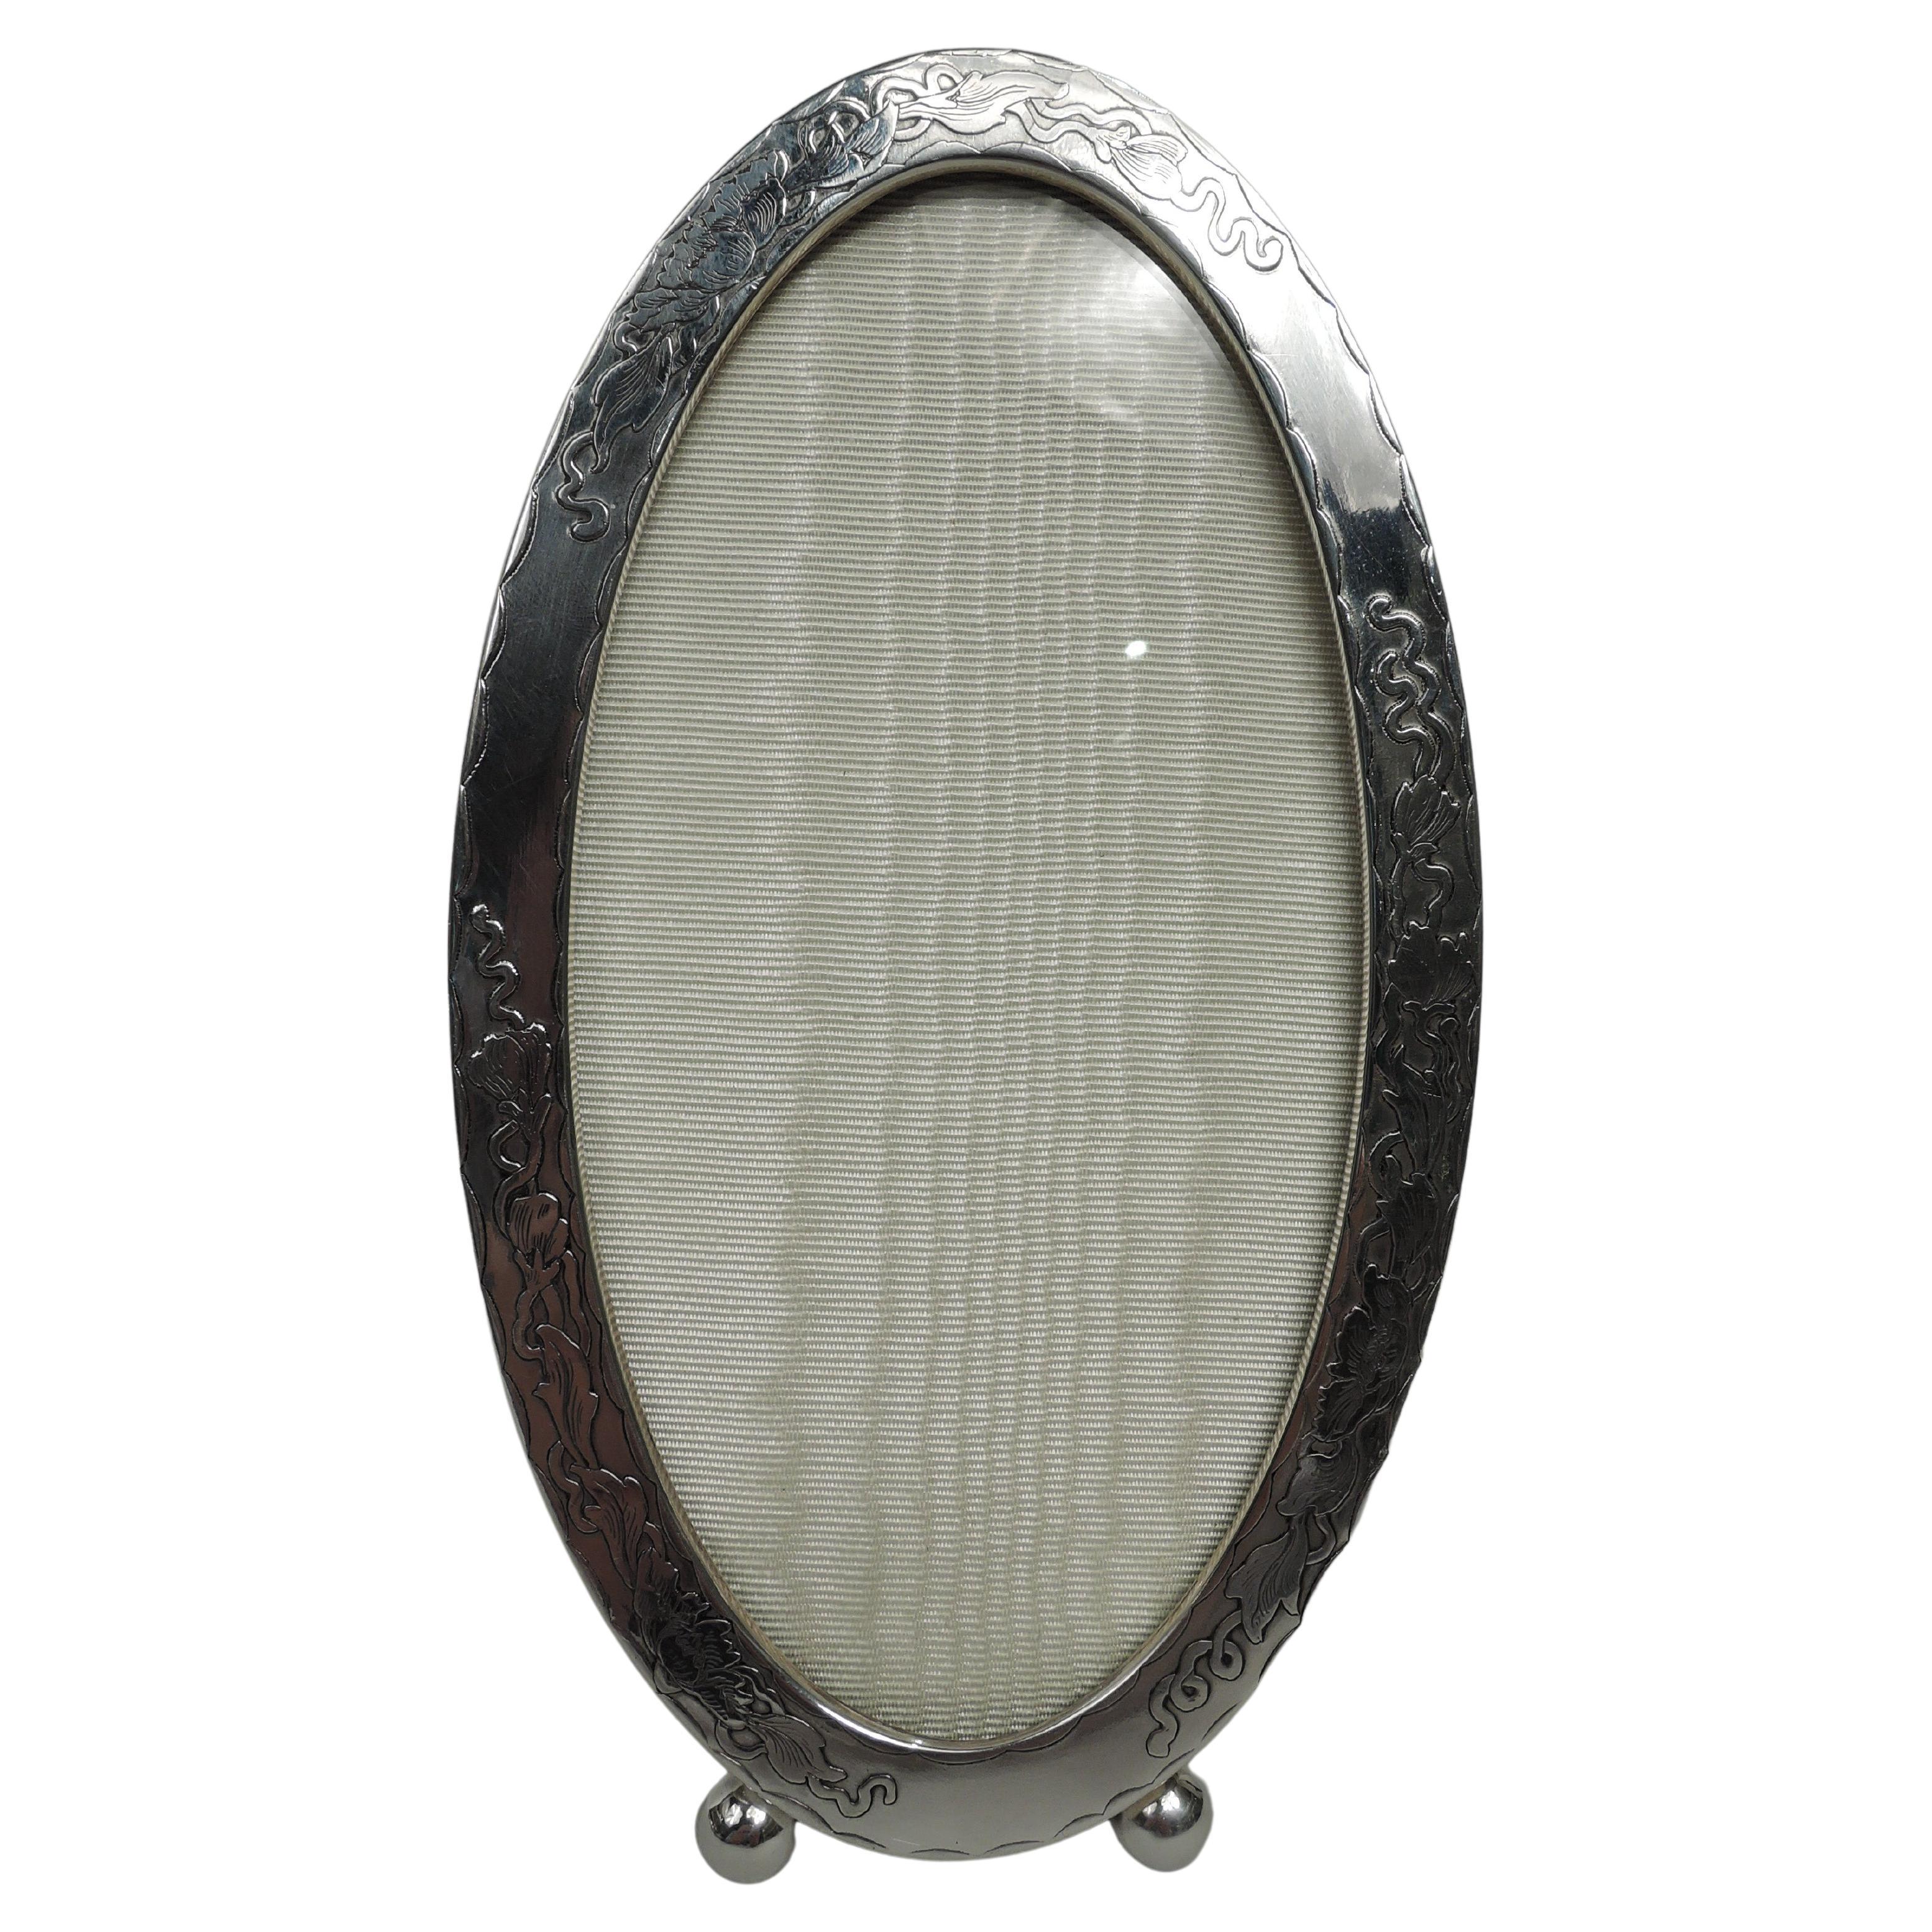 Lovely American Art Nouveau Sterling Silver Oval Picture Frame